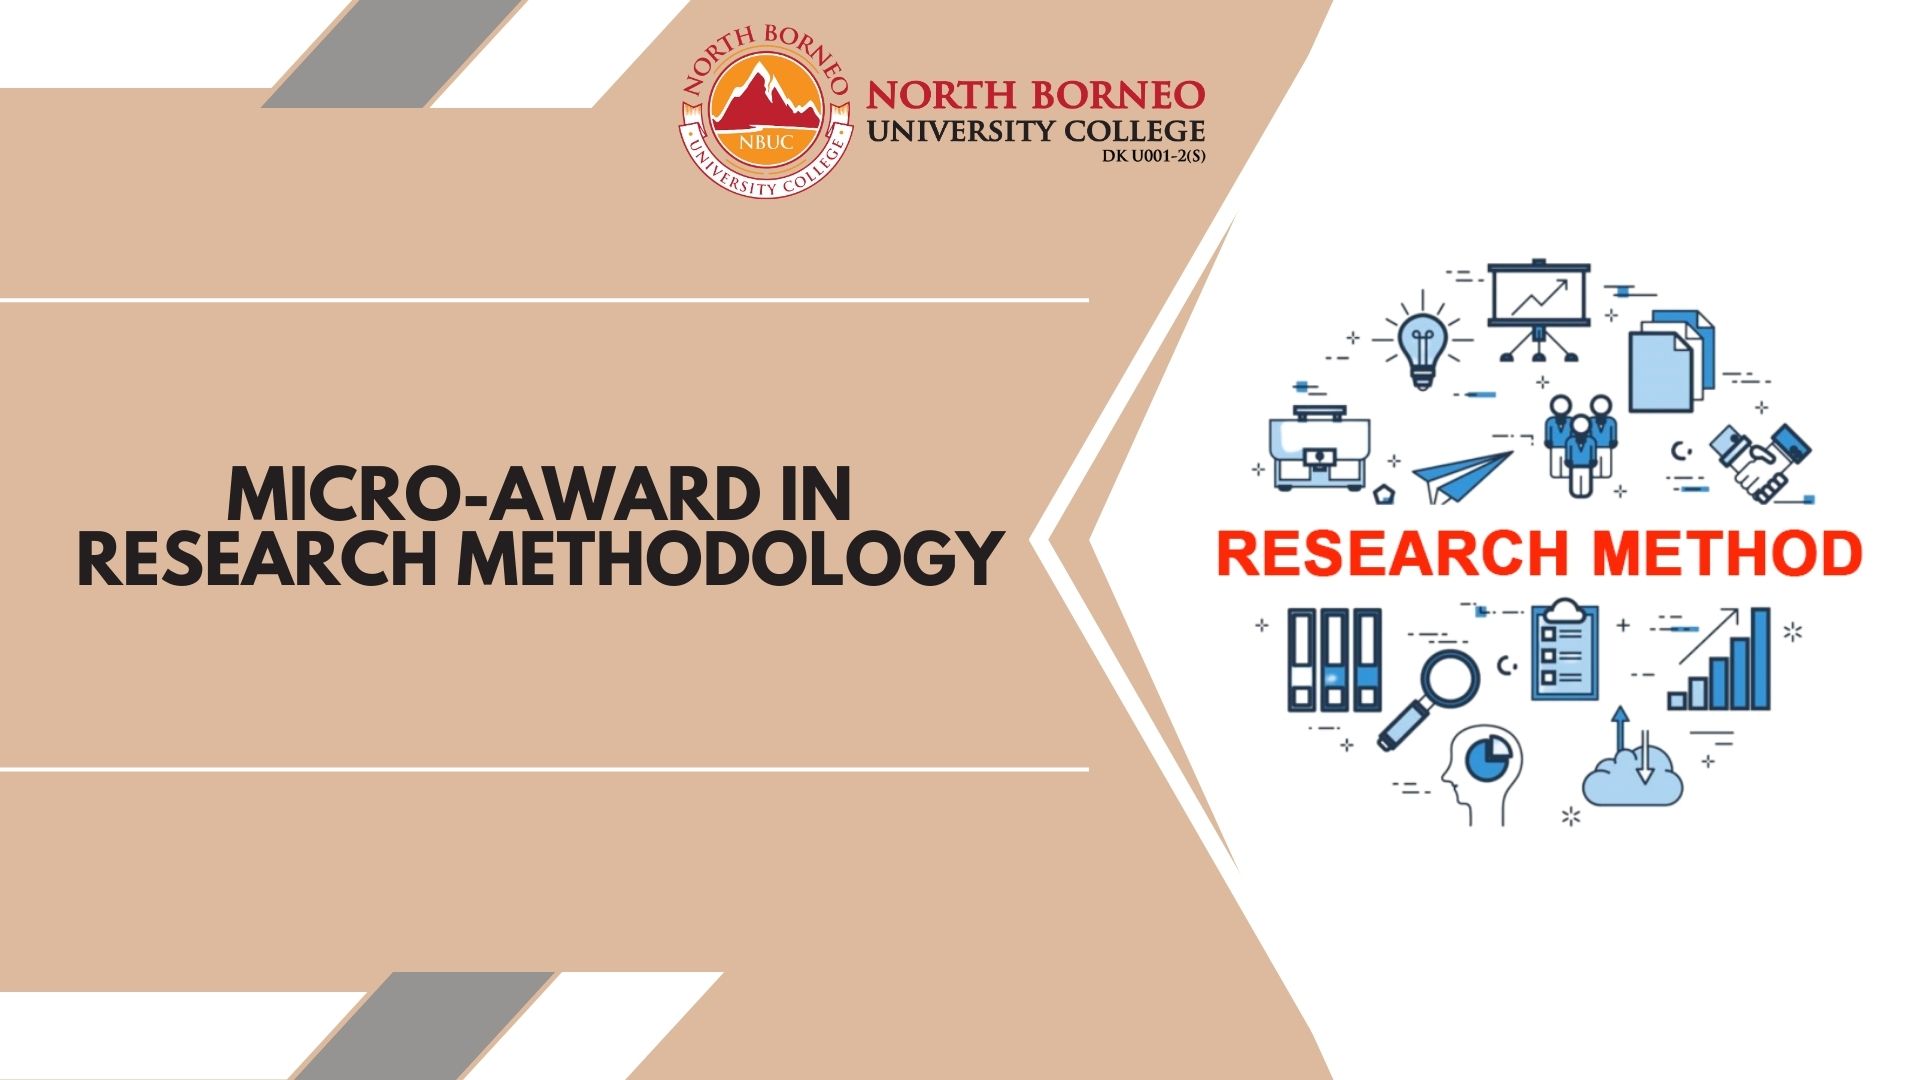 MICRO-AWARD IN RESEARCH METHODOLOGY